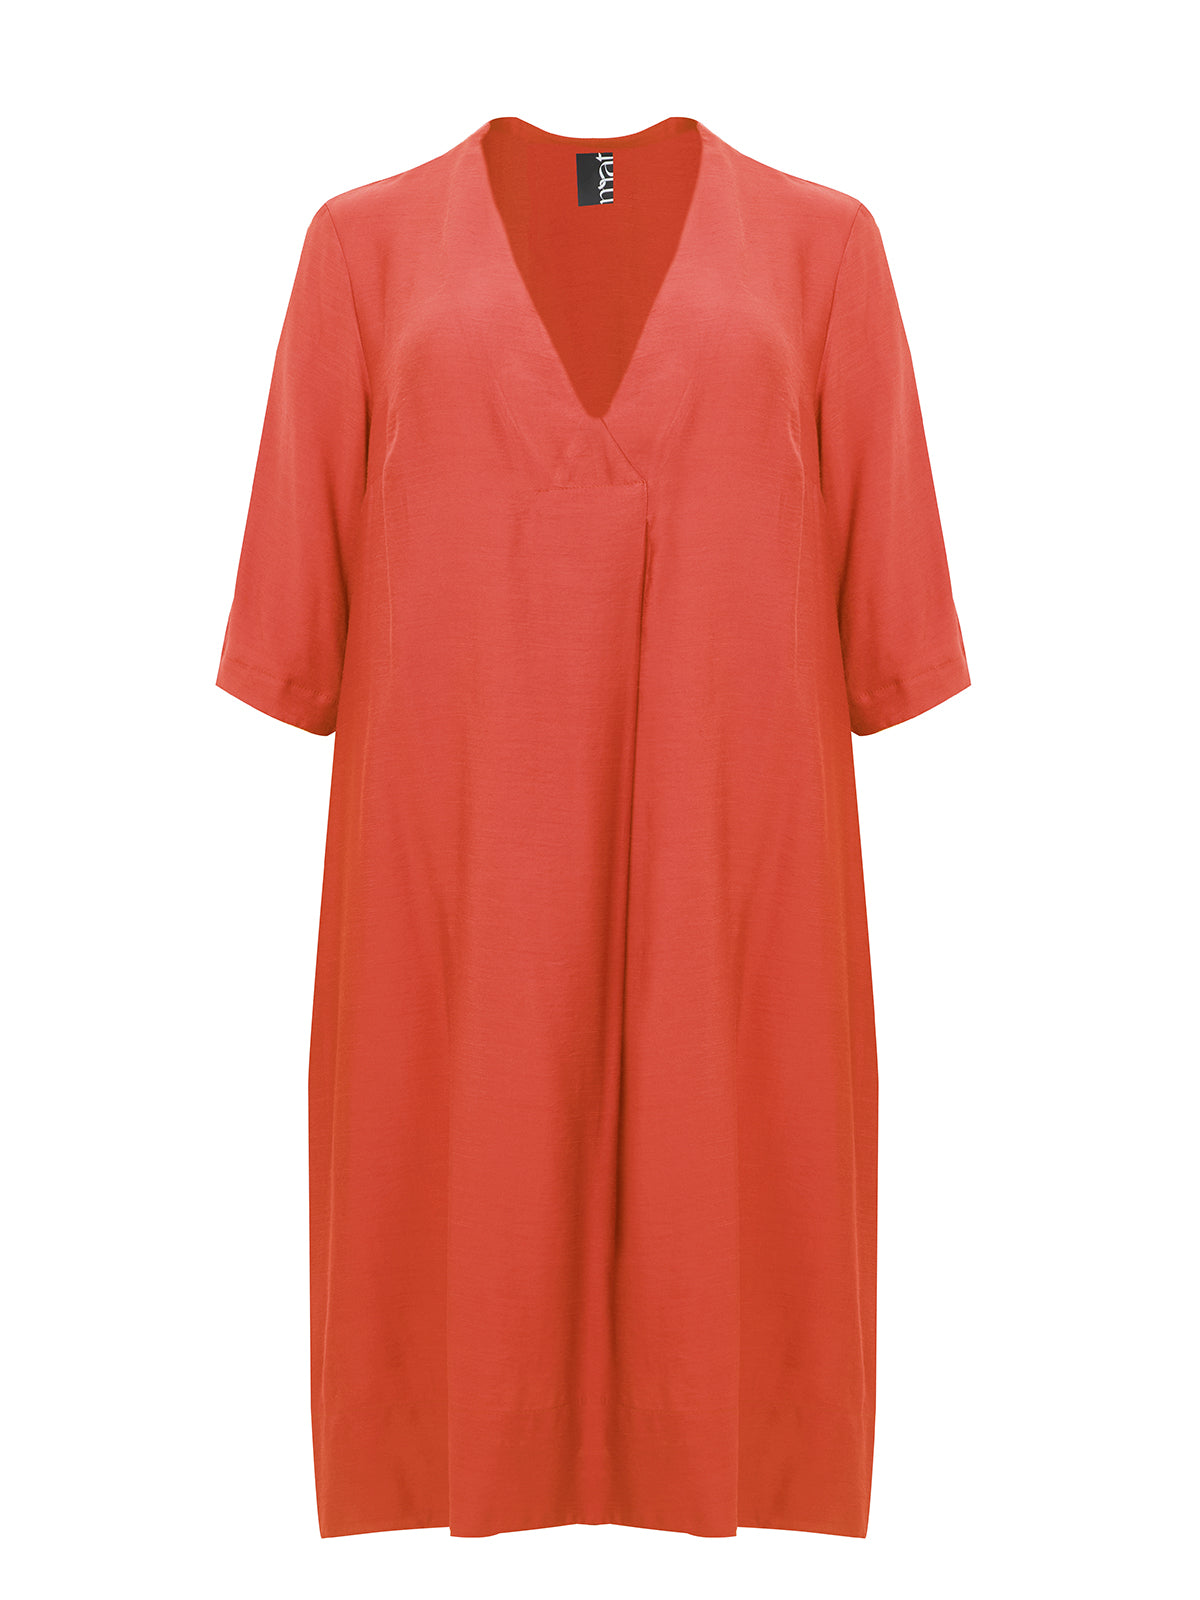 Mat Pleated Dress in Coral